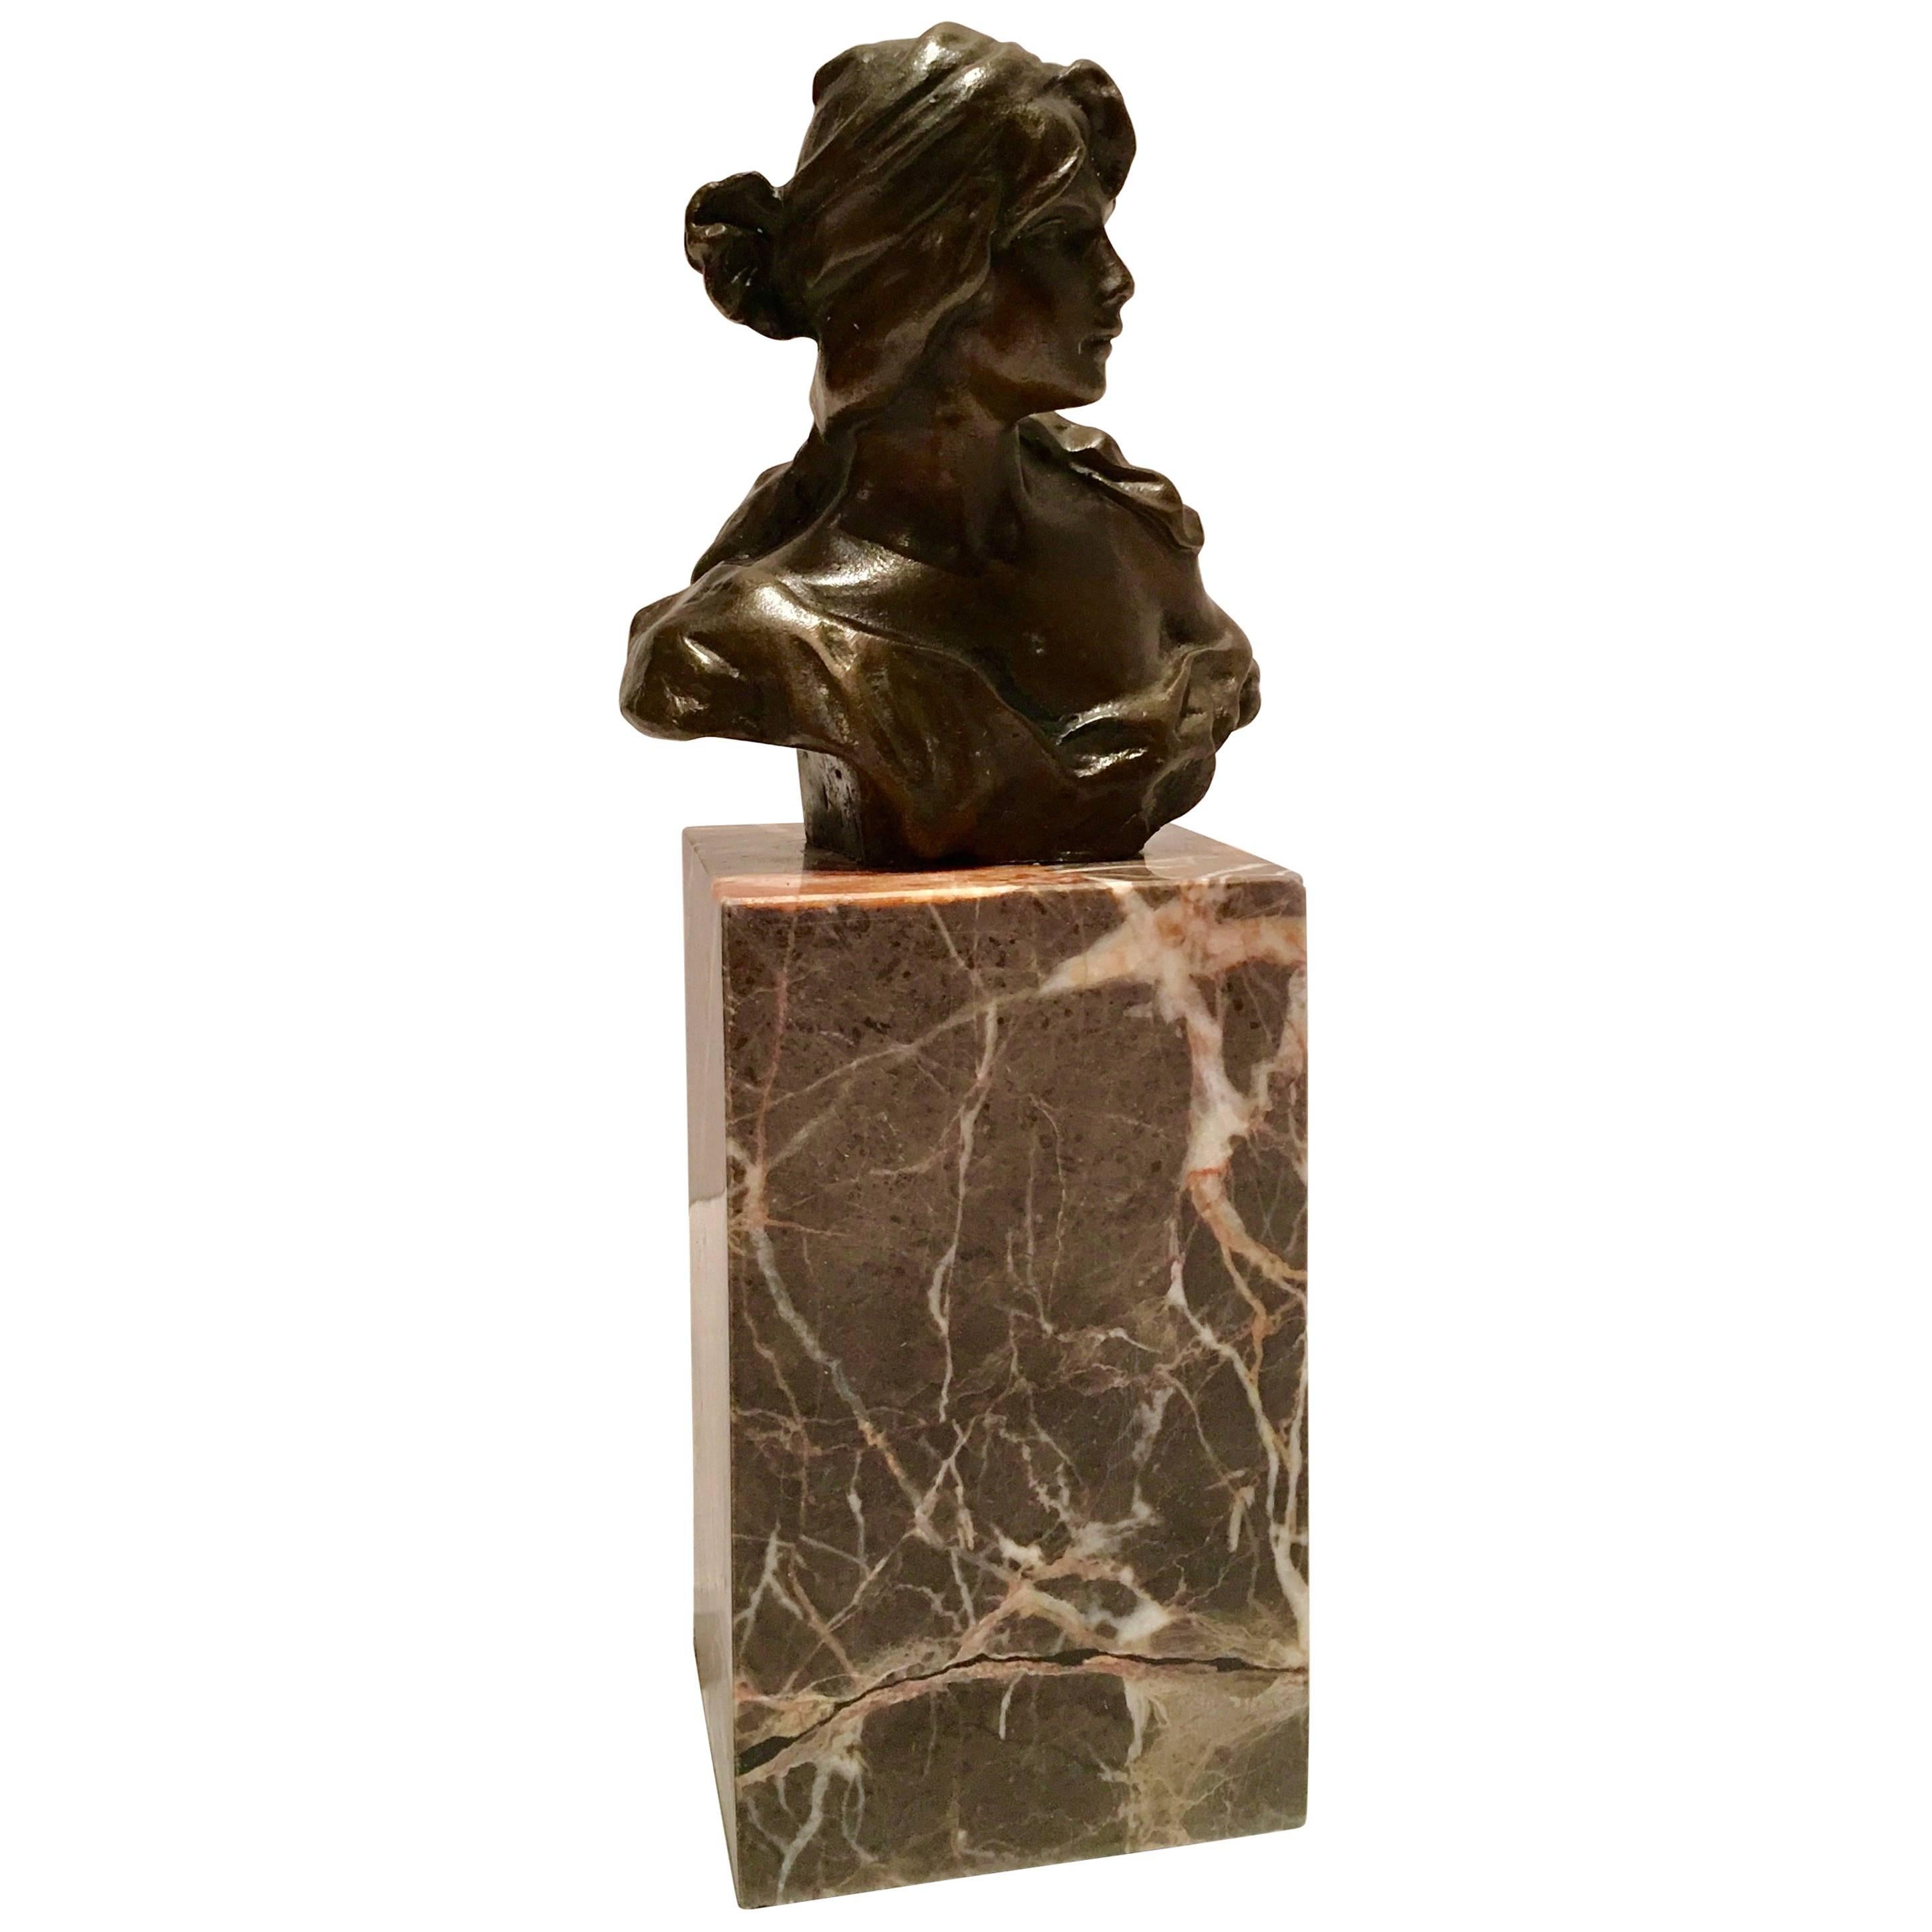 French Art Nouveau Style Bronze Female Bust Sculpture on Marble Stand